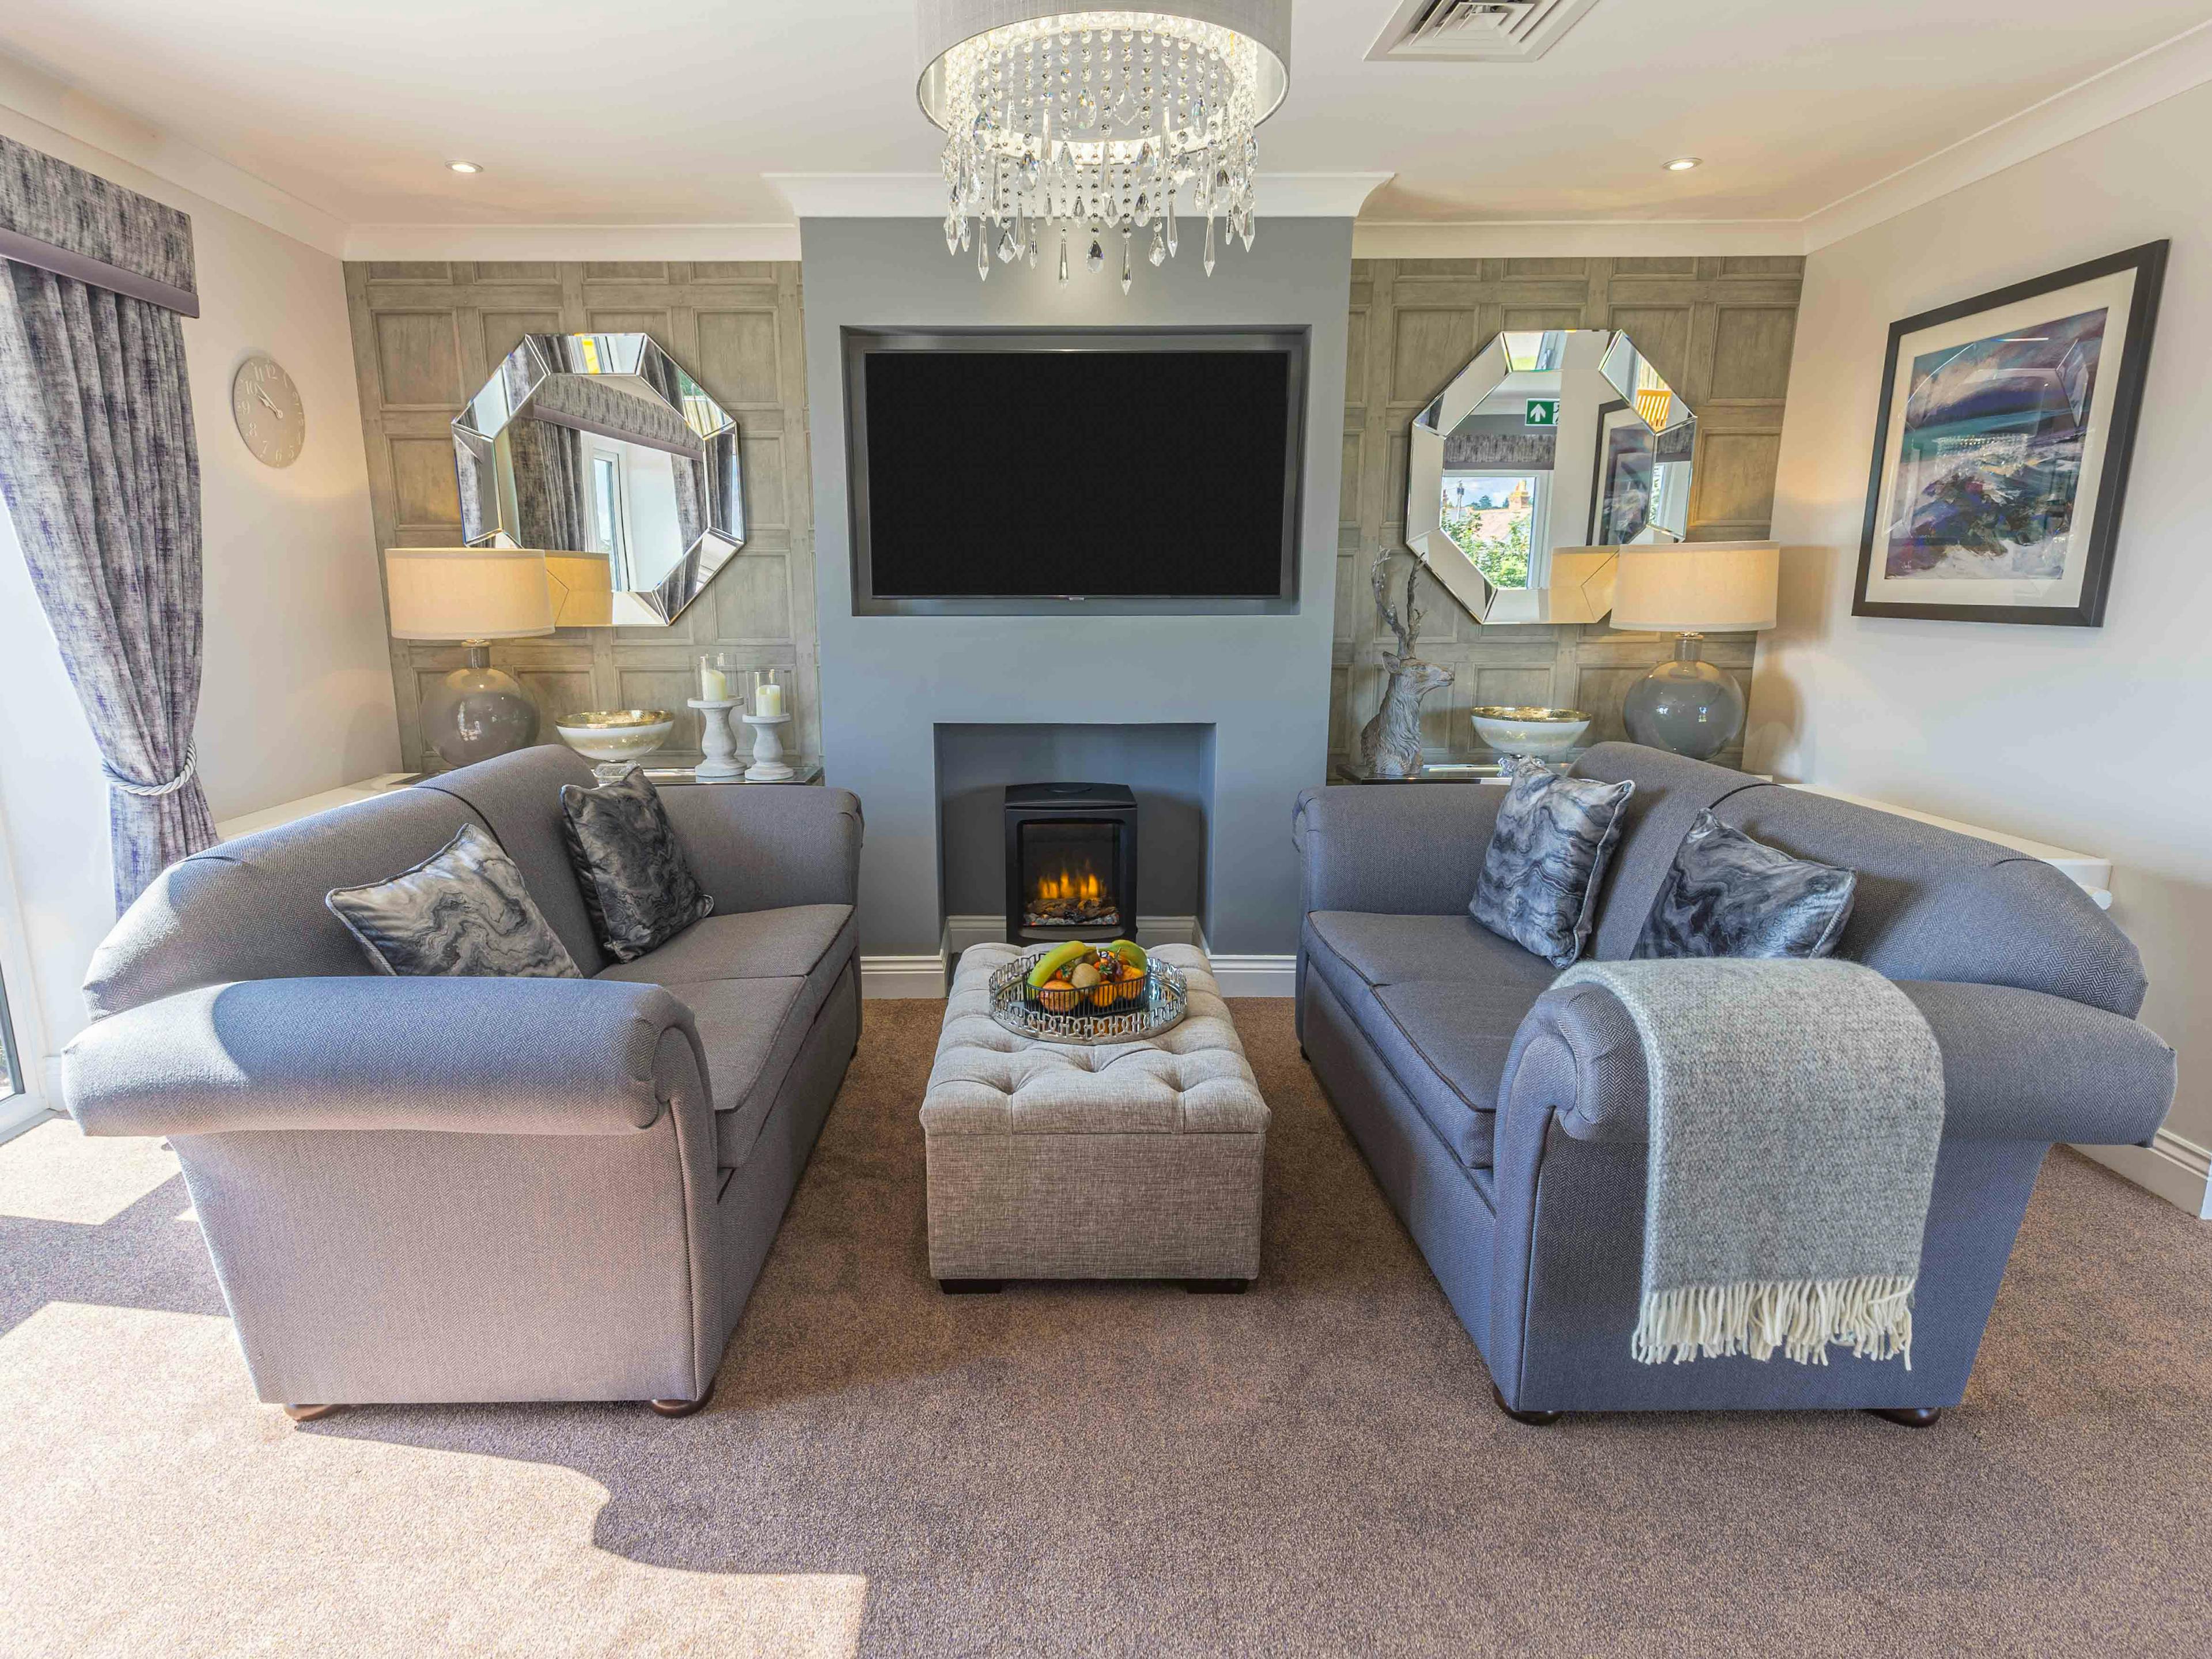 Communal Lounge at Elgar Court Care Home in Malvern, Worcestershire